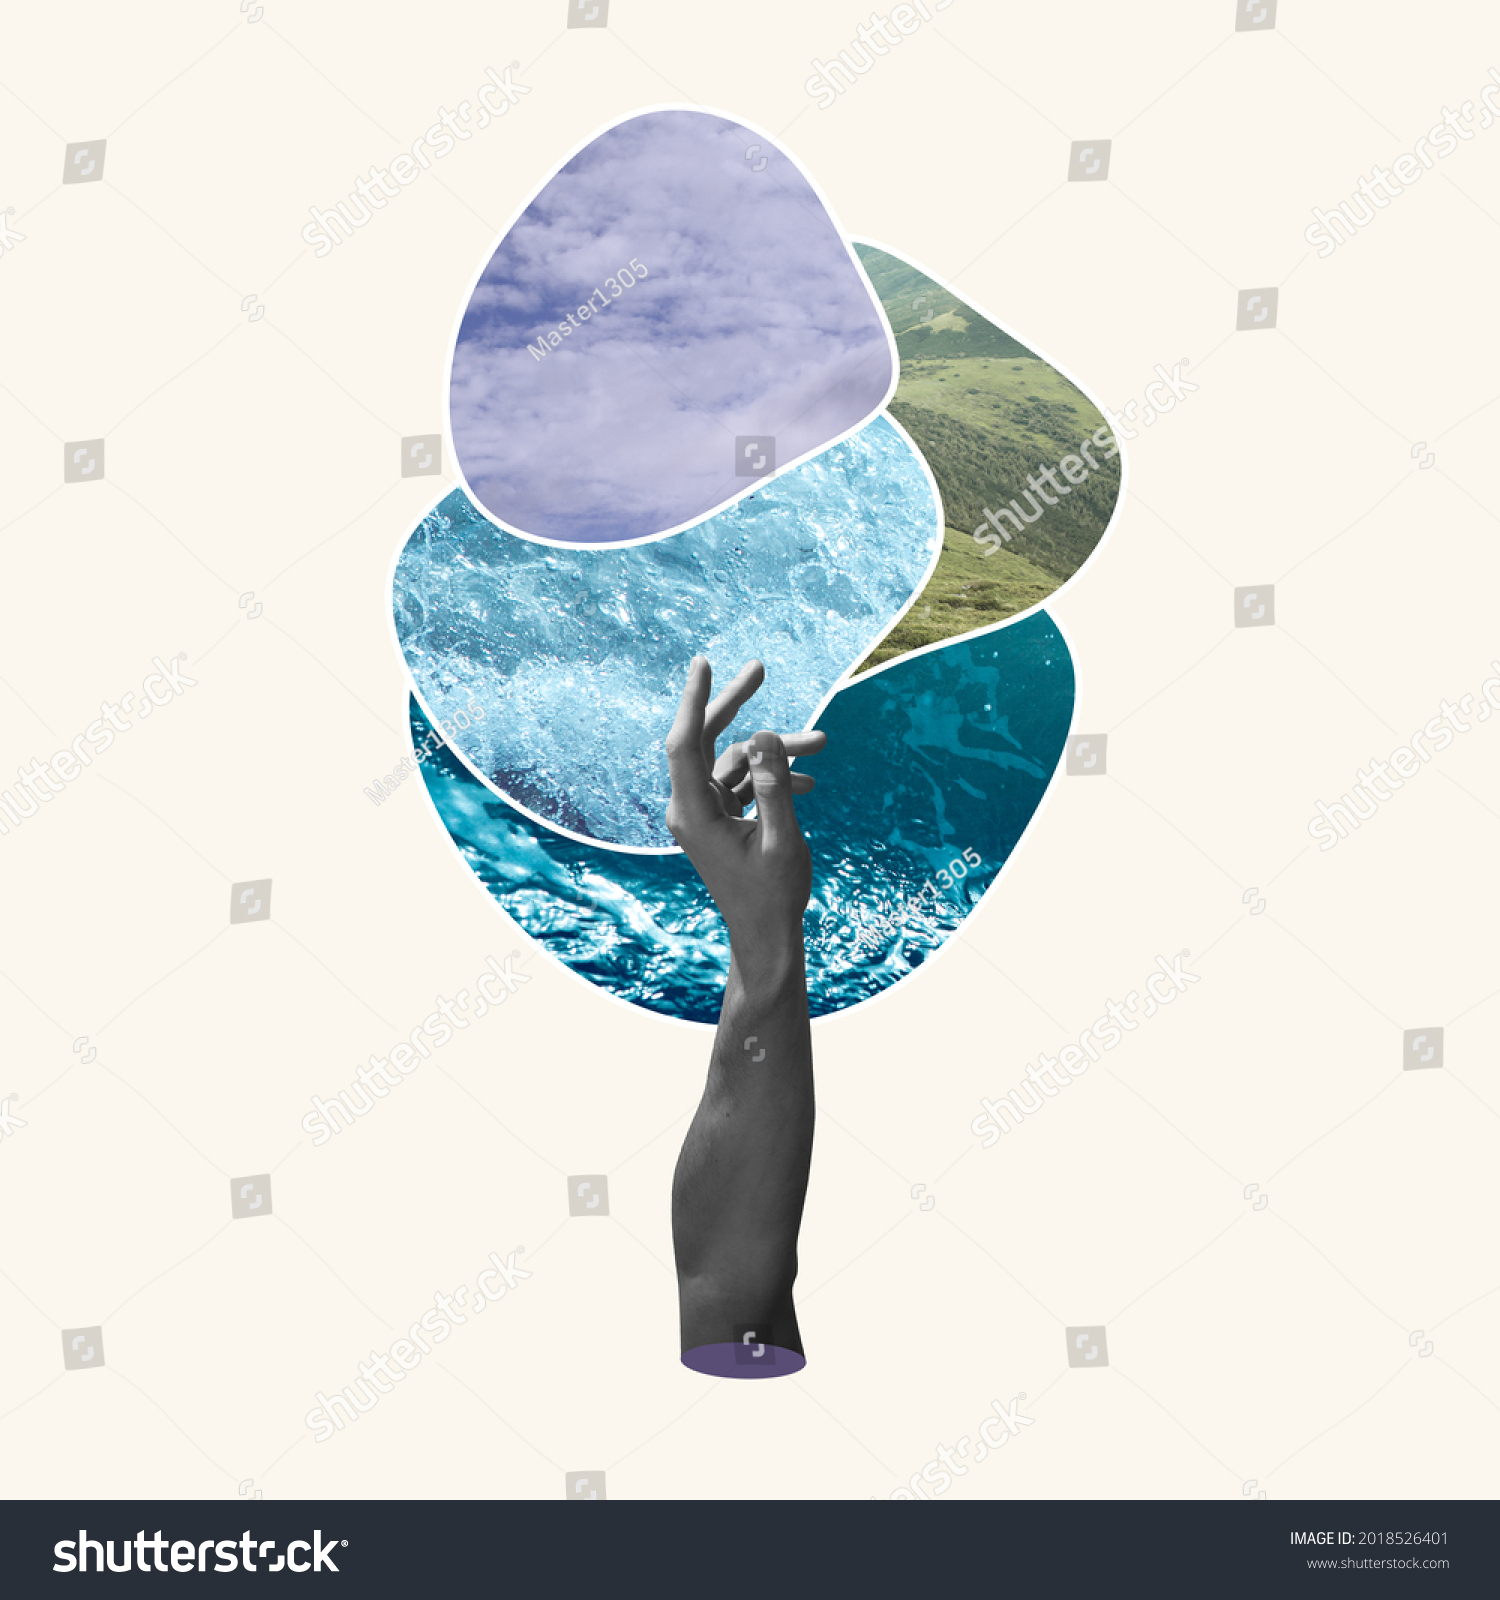 Air, water and land. Hand aesthetic on pastel background, artwork. Concept of environment, climate, symbol of four elements of nature. Idea, inspiration and minimalism. Copy space for ad. #2018526401